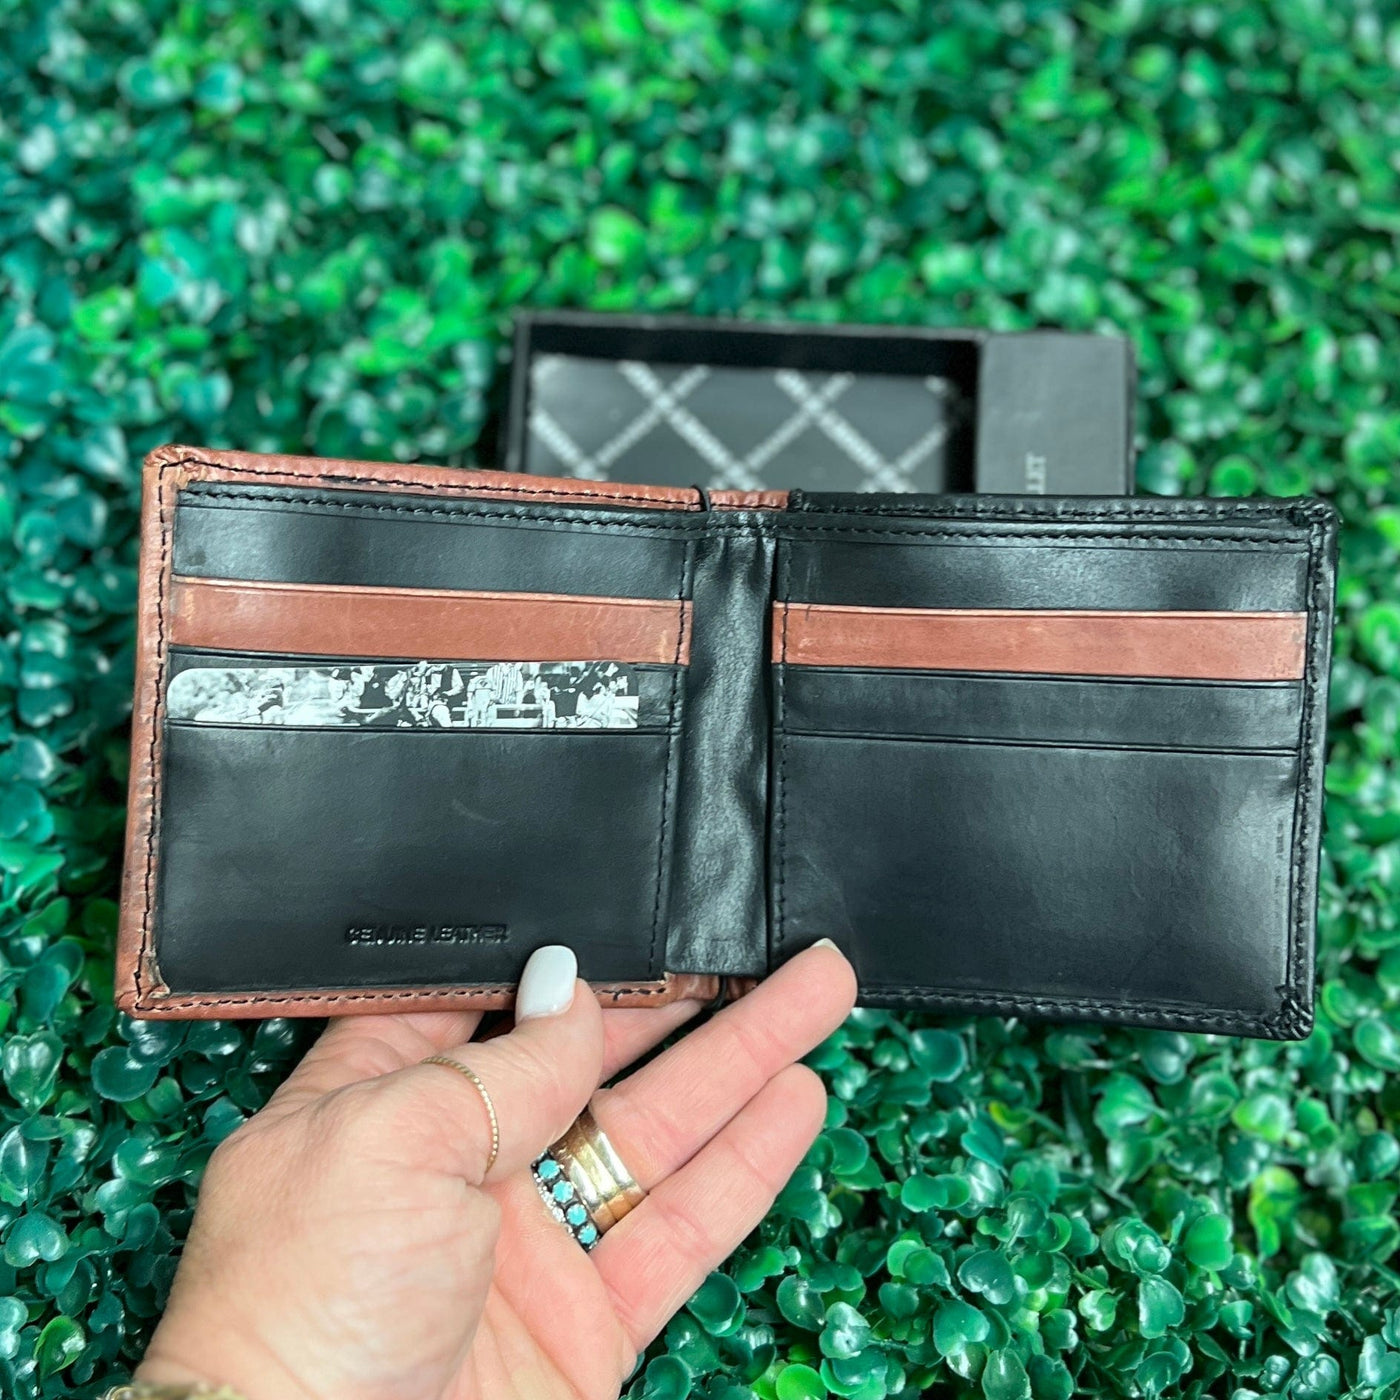 HOOEY  "NEON MOON" BIFOLD ROUGHY WALLET BLACK/BROWN W/TURQUOISE AZTEC Shabby Chic Boutique and Tanning Salon